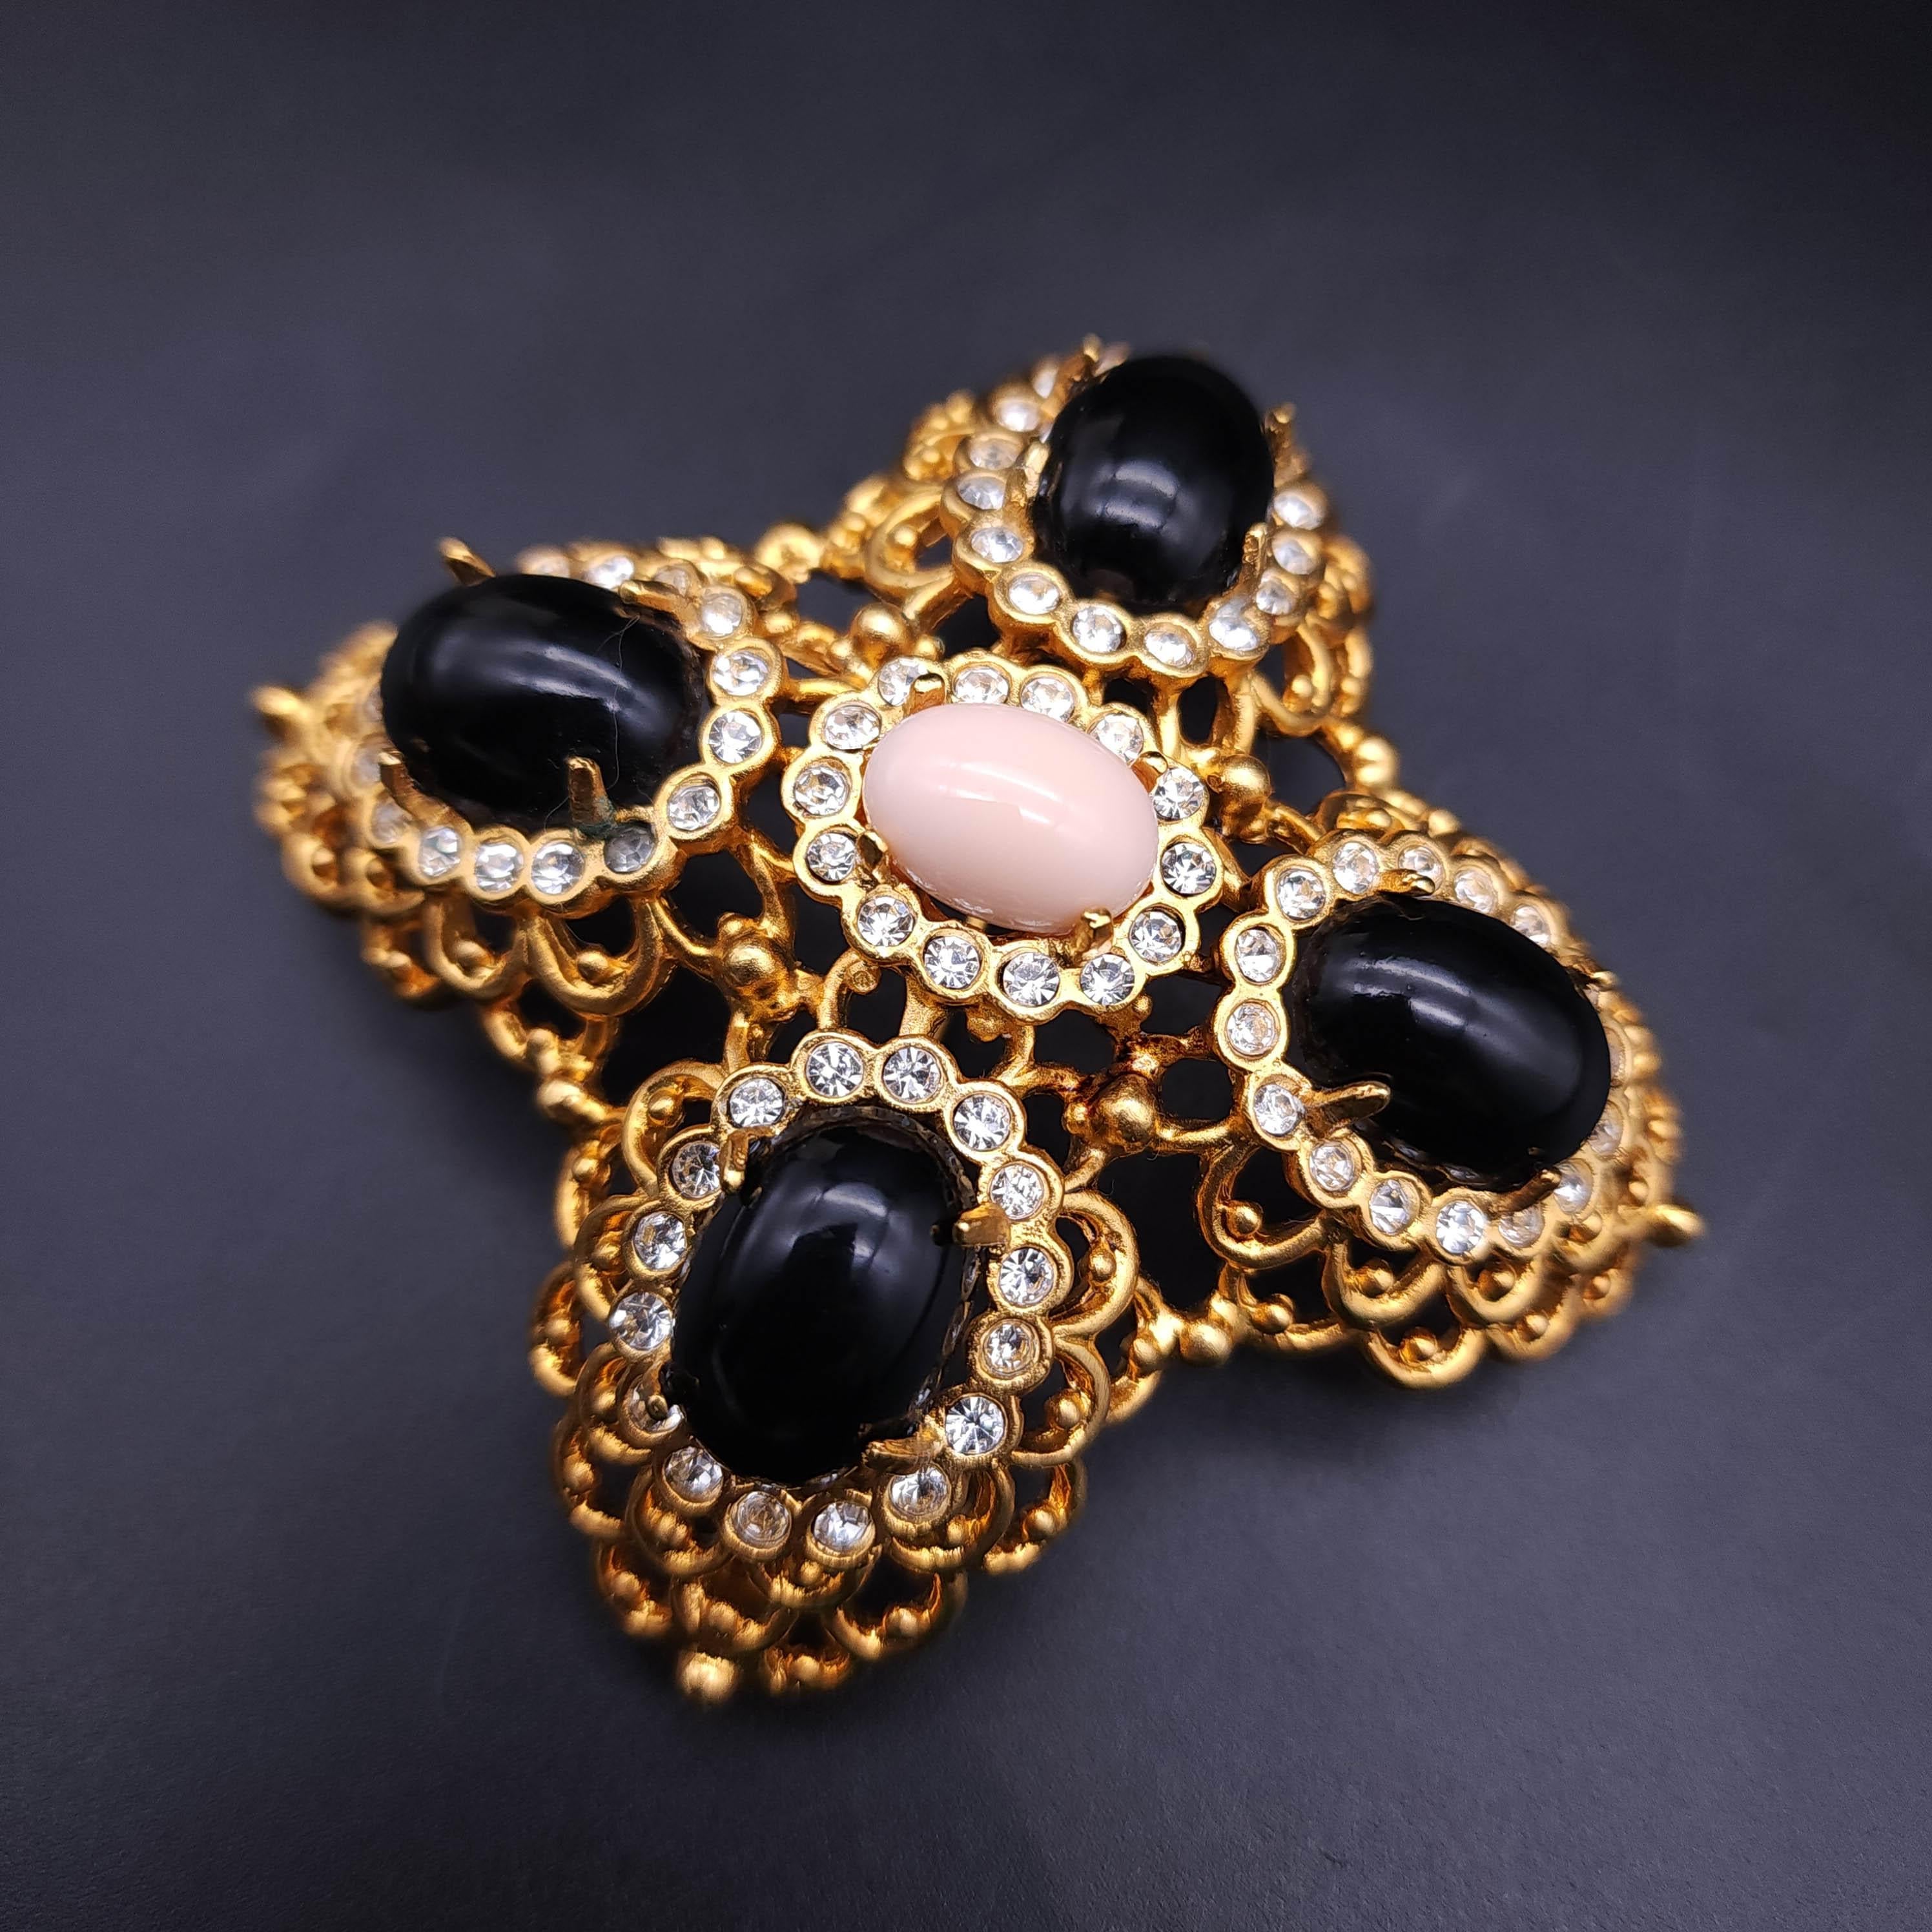 Round Cut Kenneth Jay Lane Cabochon Cross Pin Brooch, Black & Pink, Gold Finish, Crystals For Sale